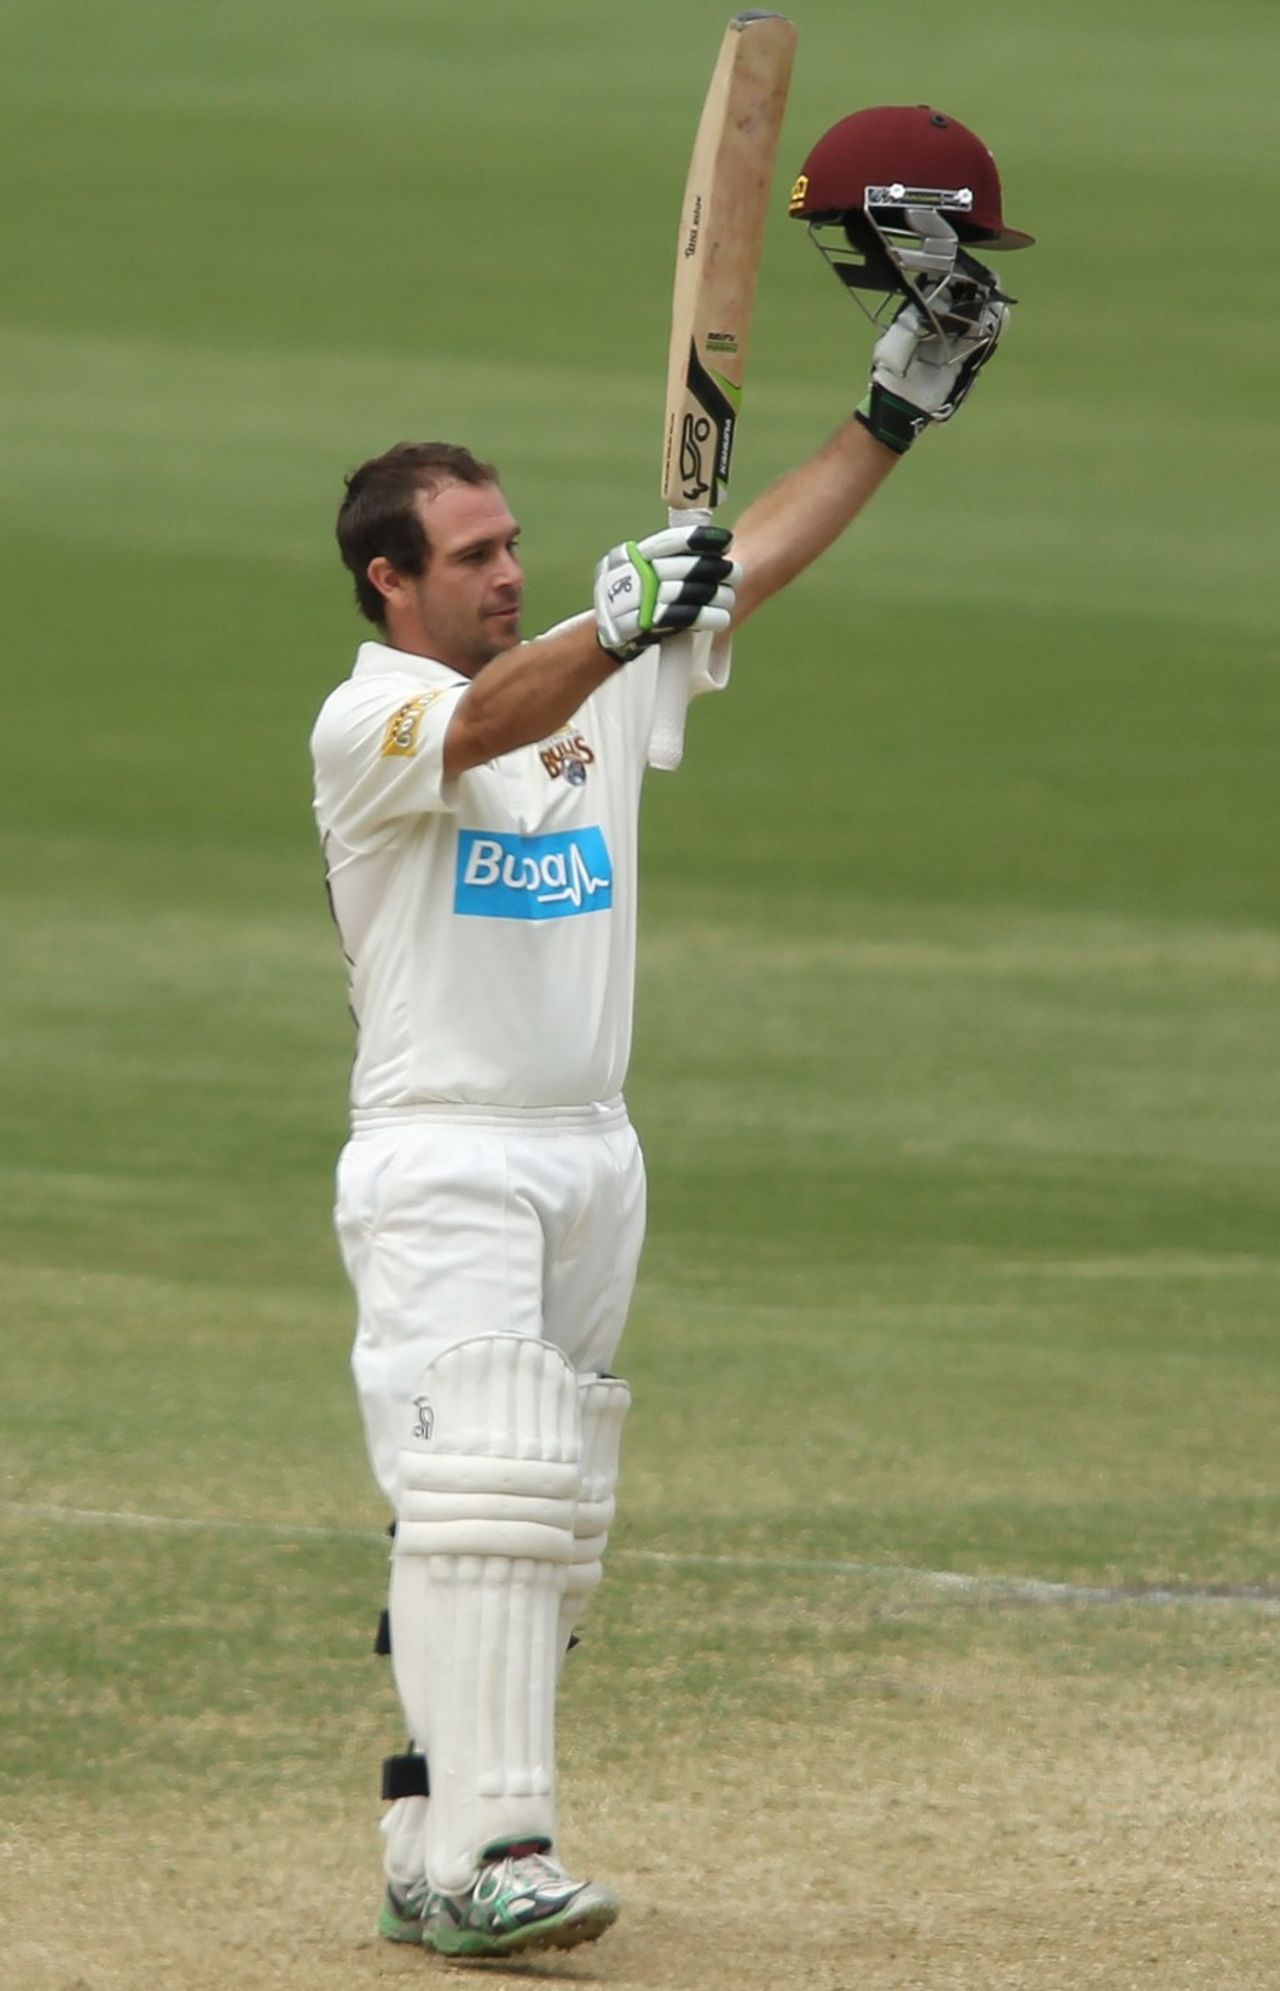 Wade Townsend celebrates his century, South Australia v Queensland, Sheffield Shield, Adelaide, 3rd day, October 25, 2012